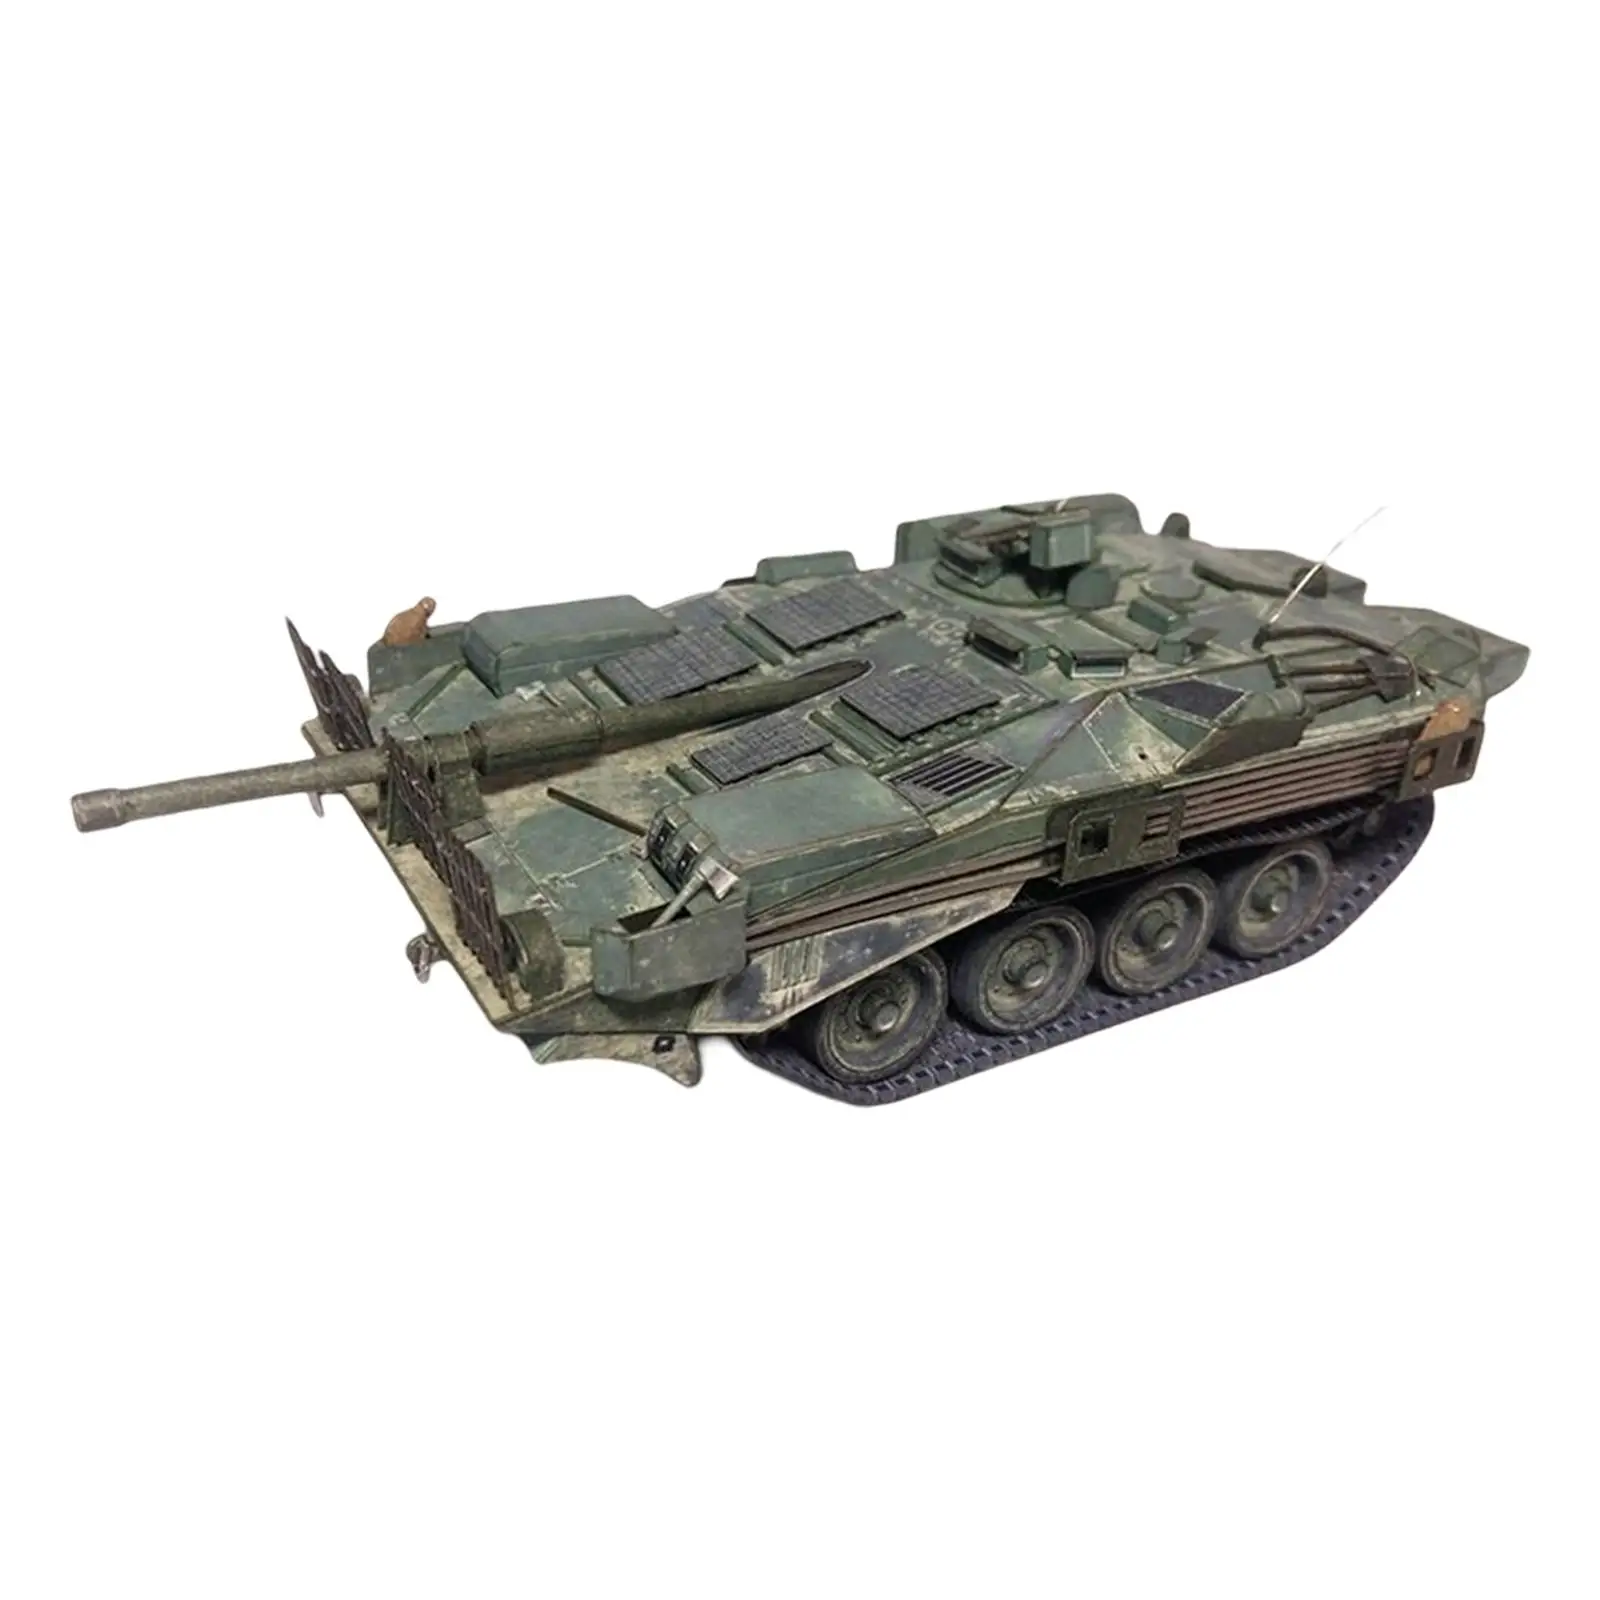 1:35 Scale Tank Model Decoration Collectibles DIY Assemble Educational Toys Paper Model Kit 3D Paper Puzzle for Gift Kids Adults